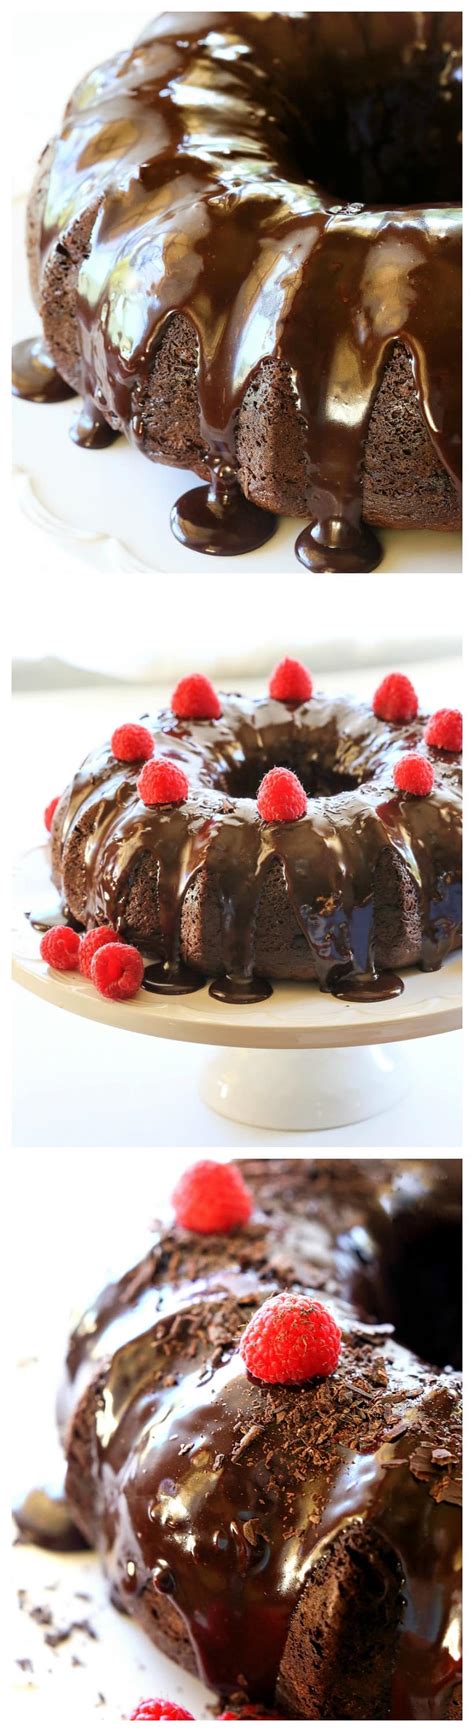 easy-chocolate-bundt-cake-the-girl-who-ate-everything image